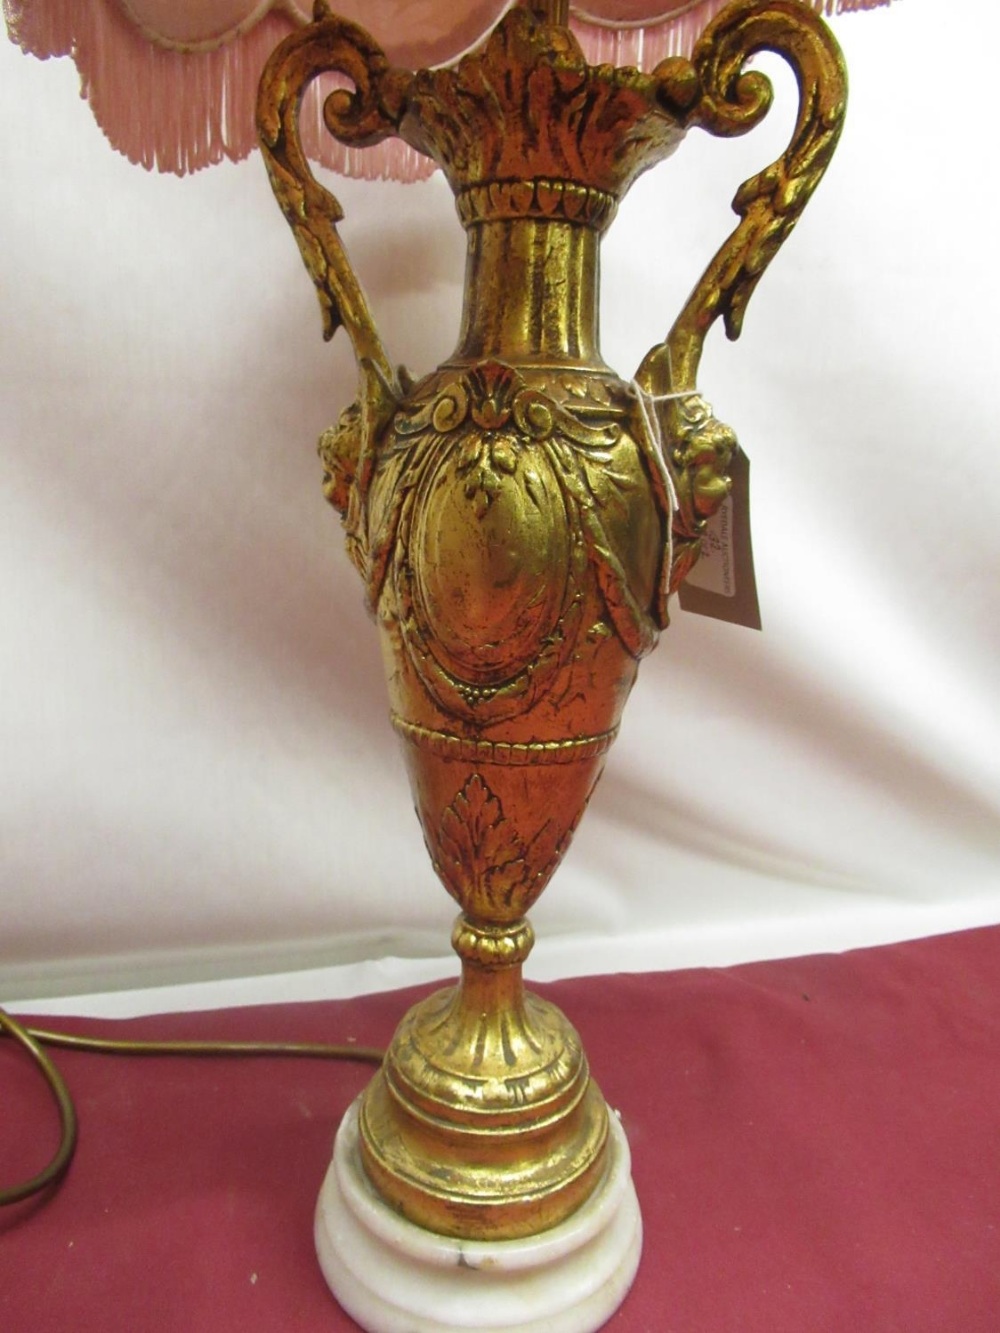 C20th toleware neo-classical design table lamp, with urn shaped body, swan neck and acanthus leaf - Image 5 of 6